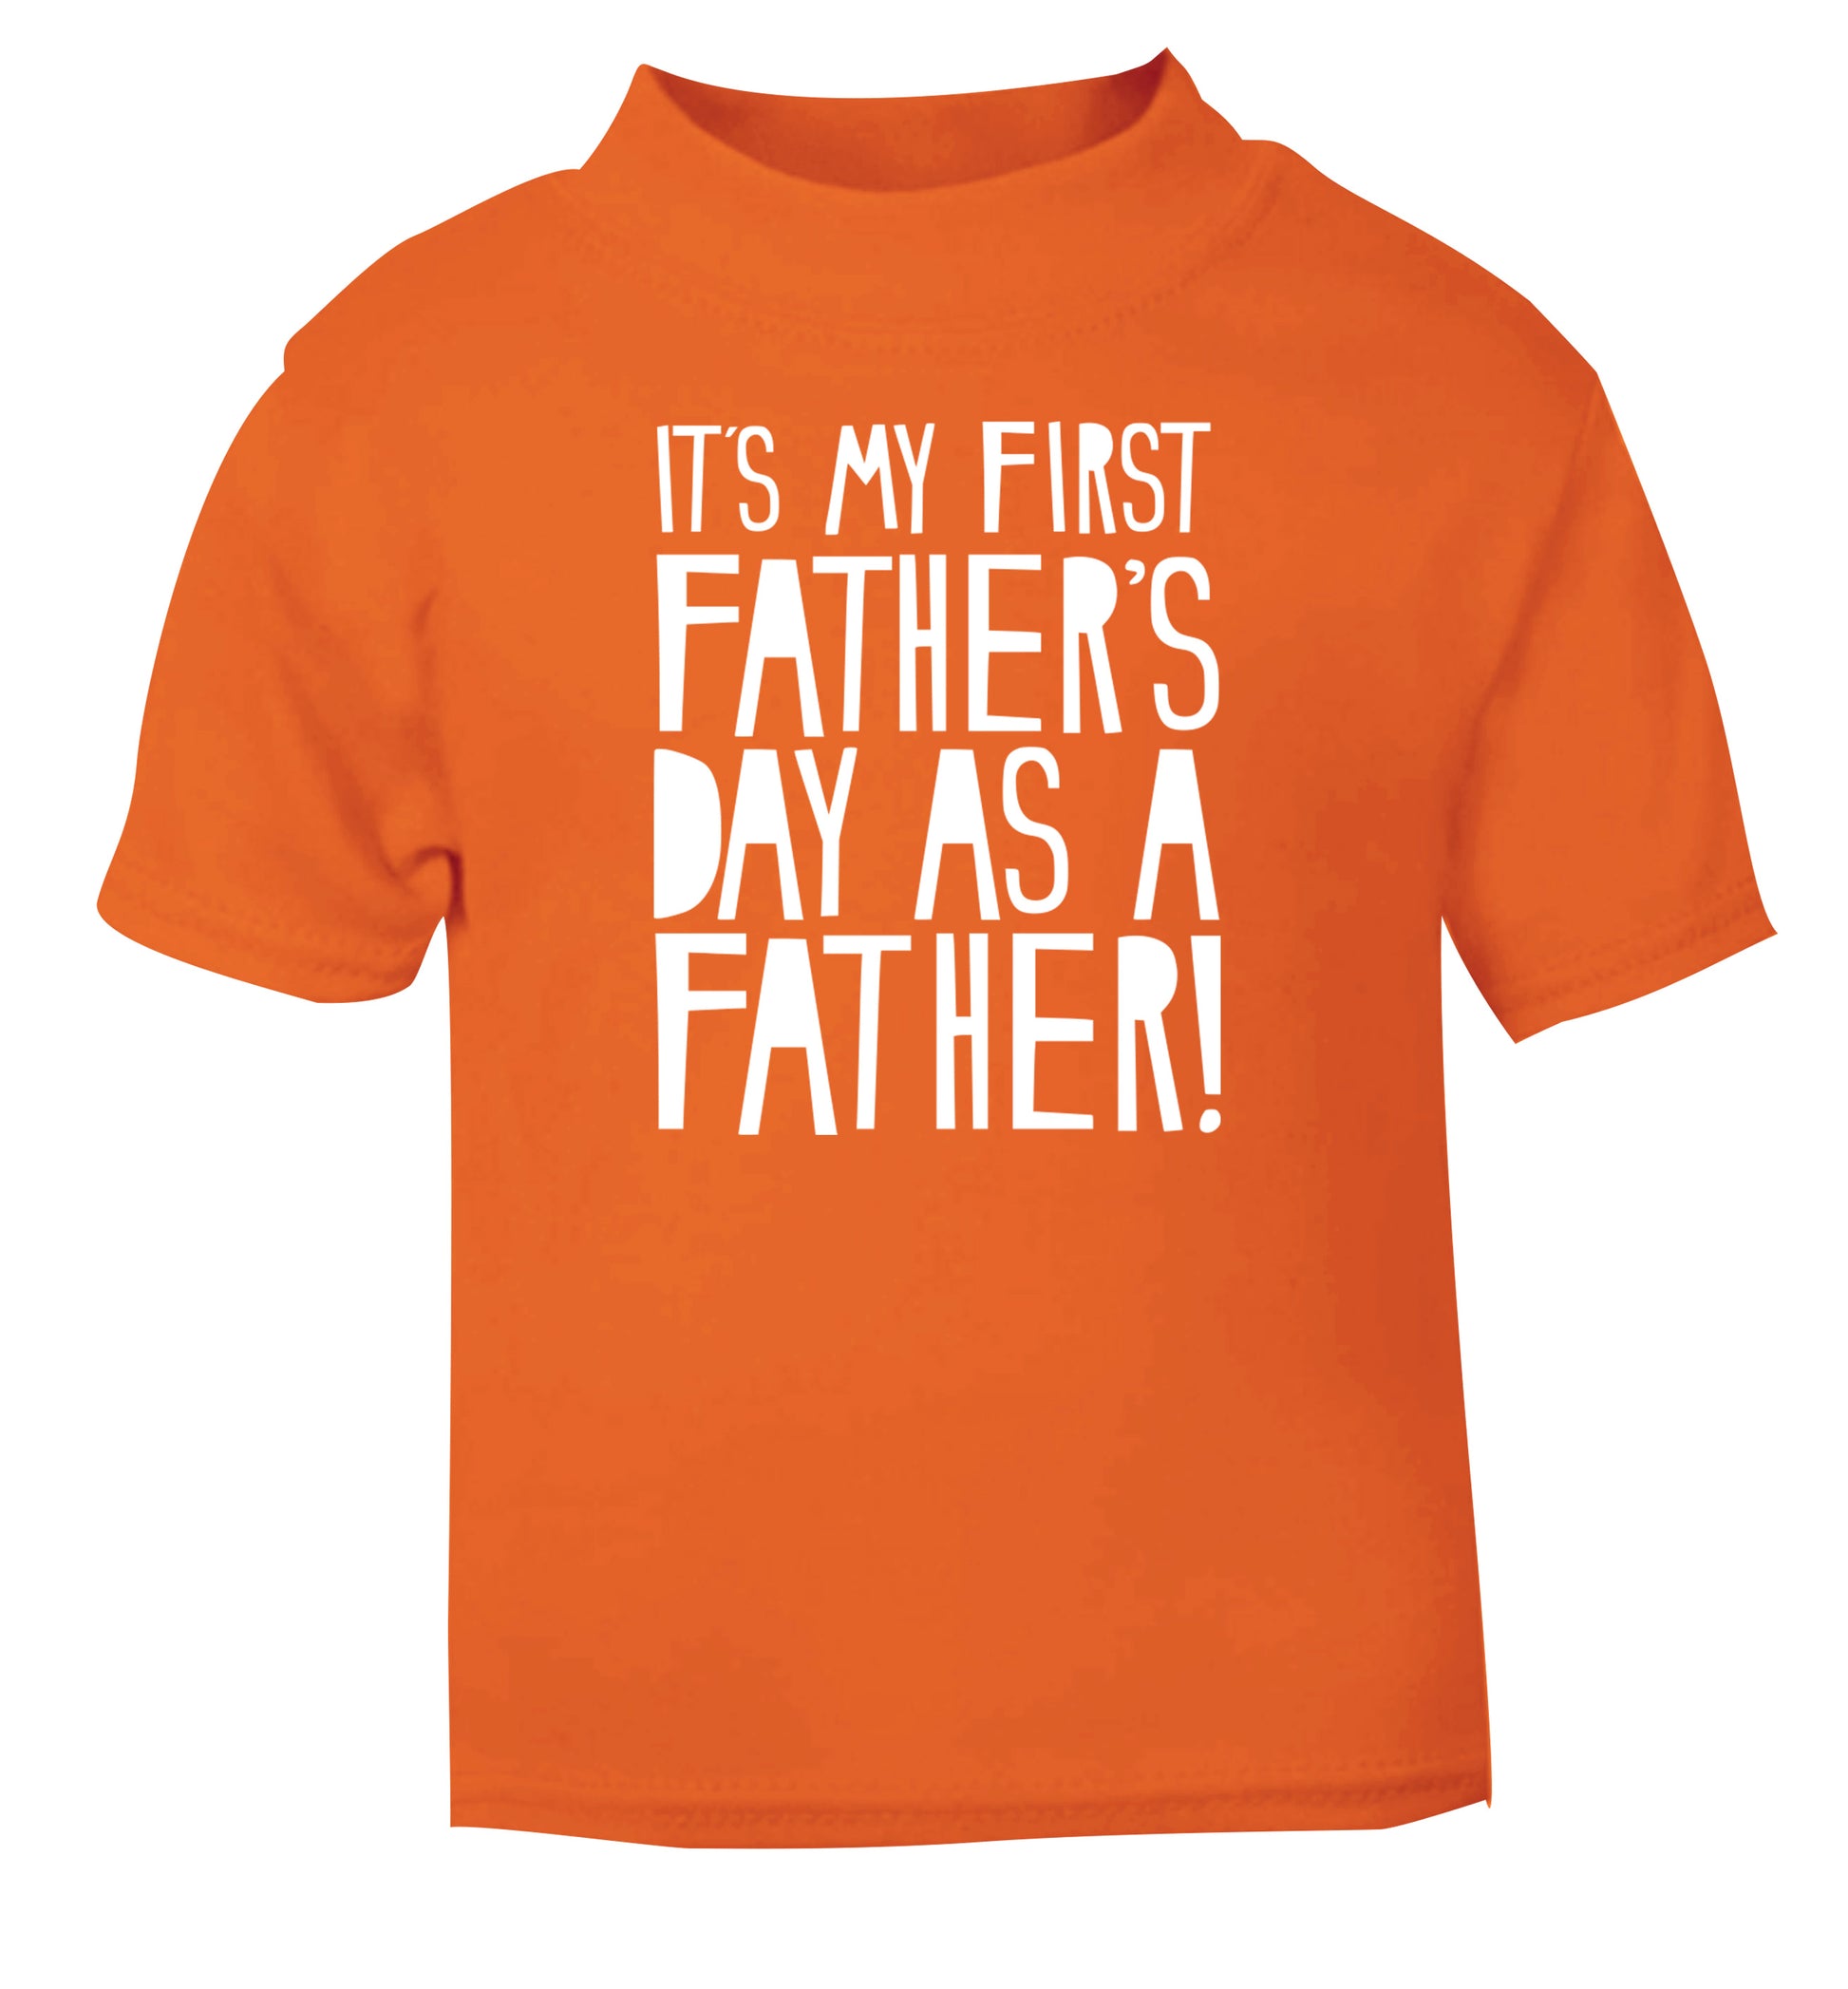 It's my first Father's Day as a father! orange Baby Toddler Tshirt 2 Years